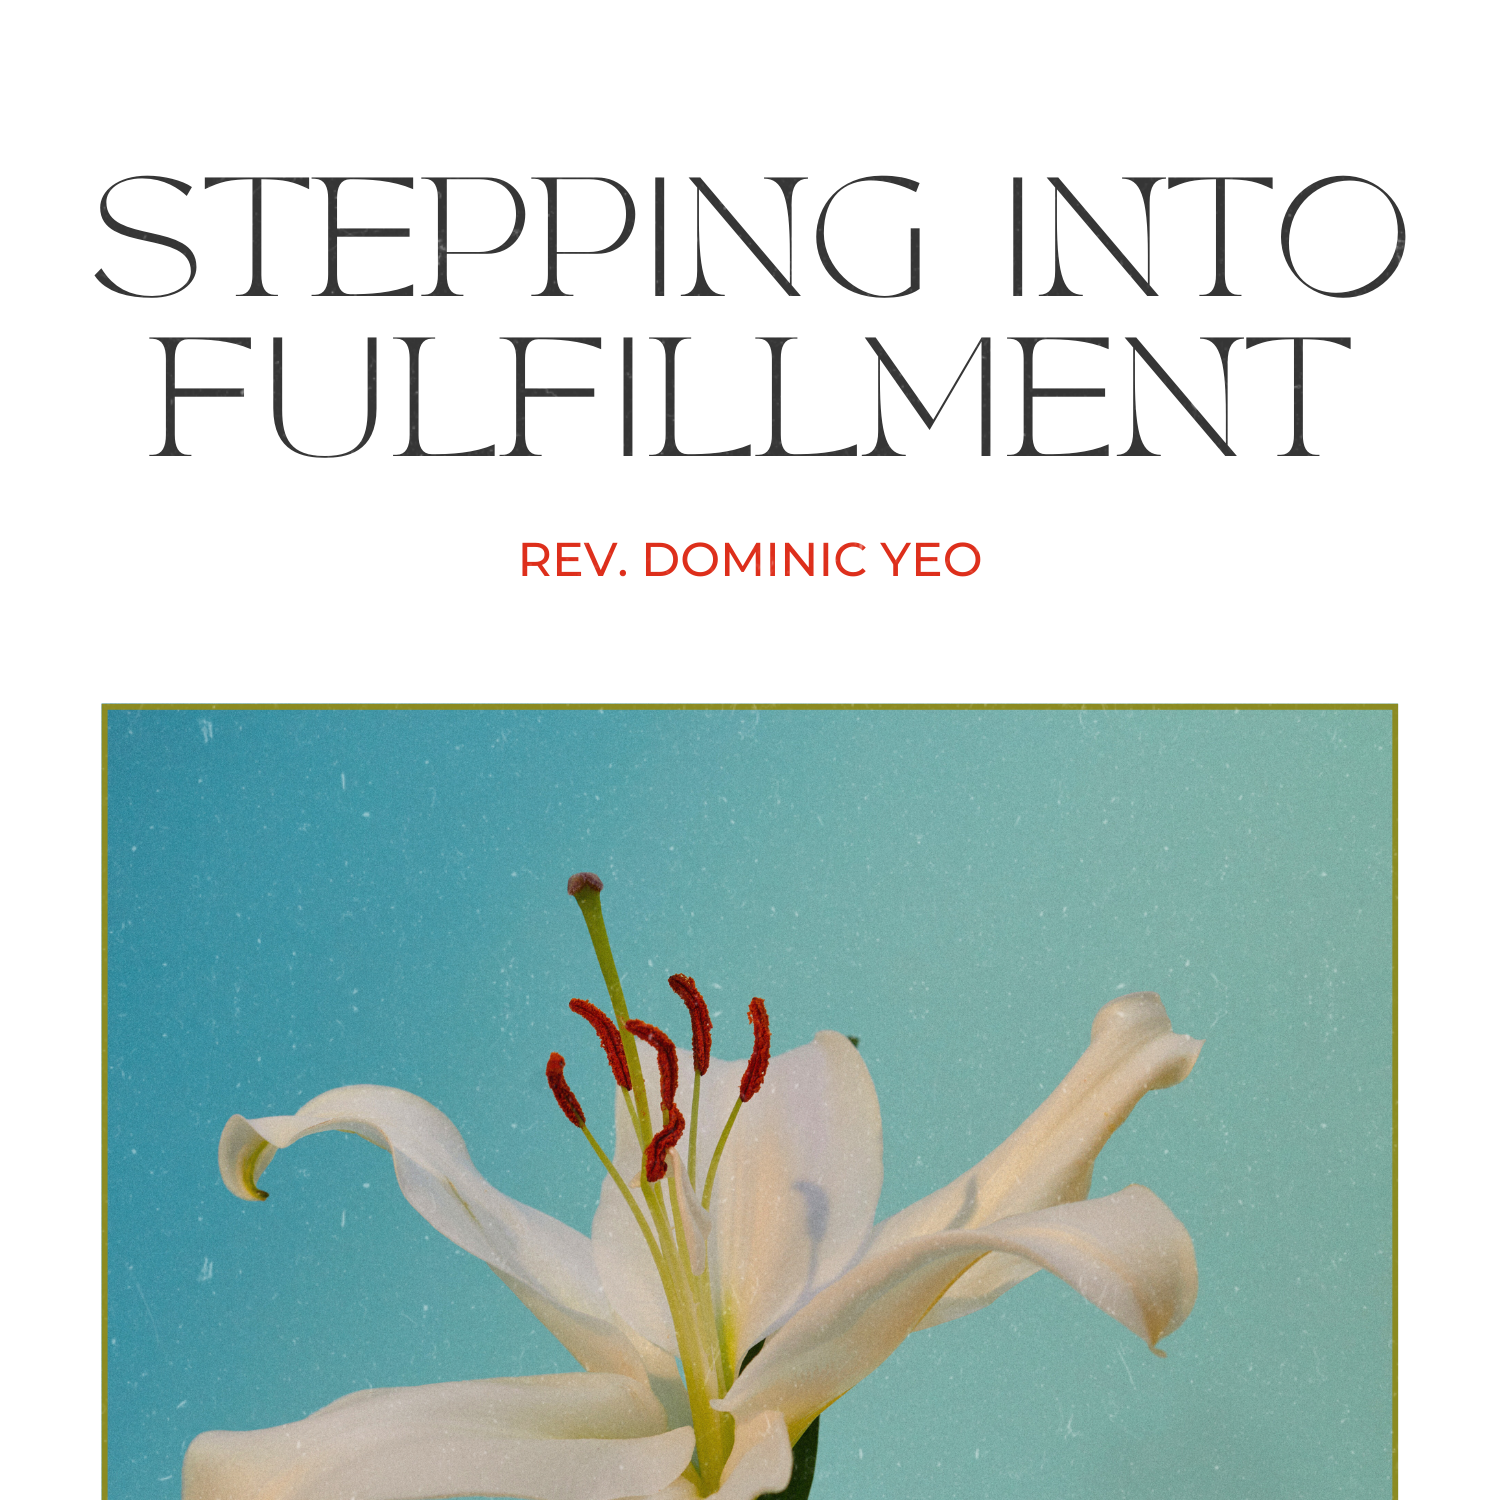 Stepping Into Fulfillment (Rev. Dominic Yeo)